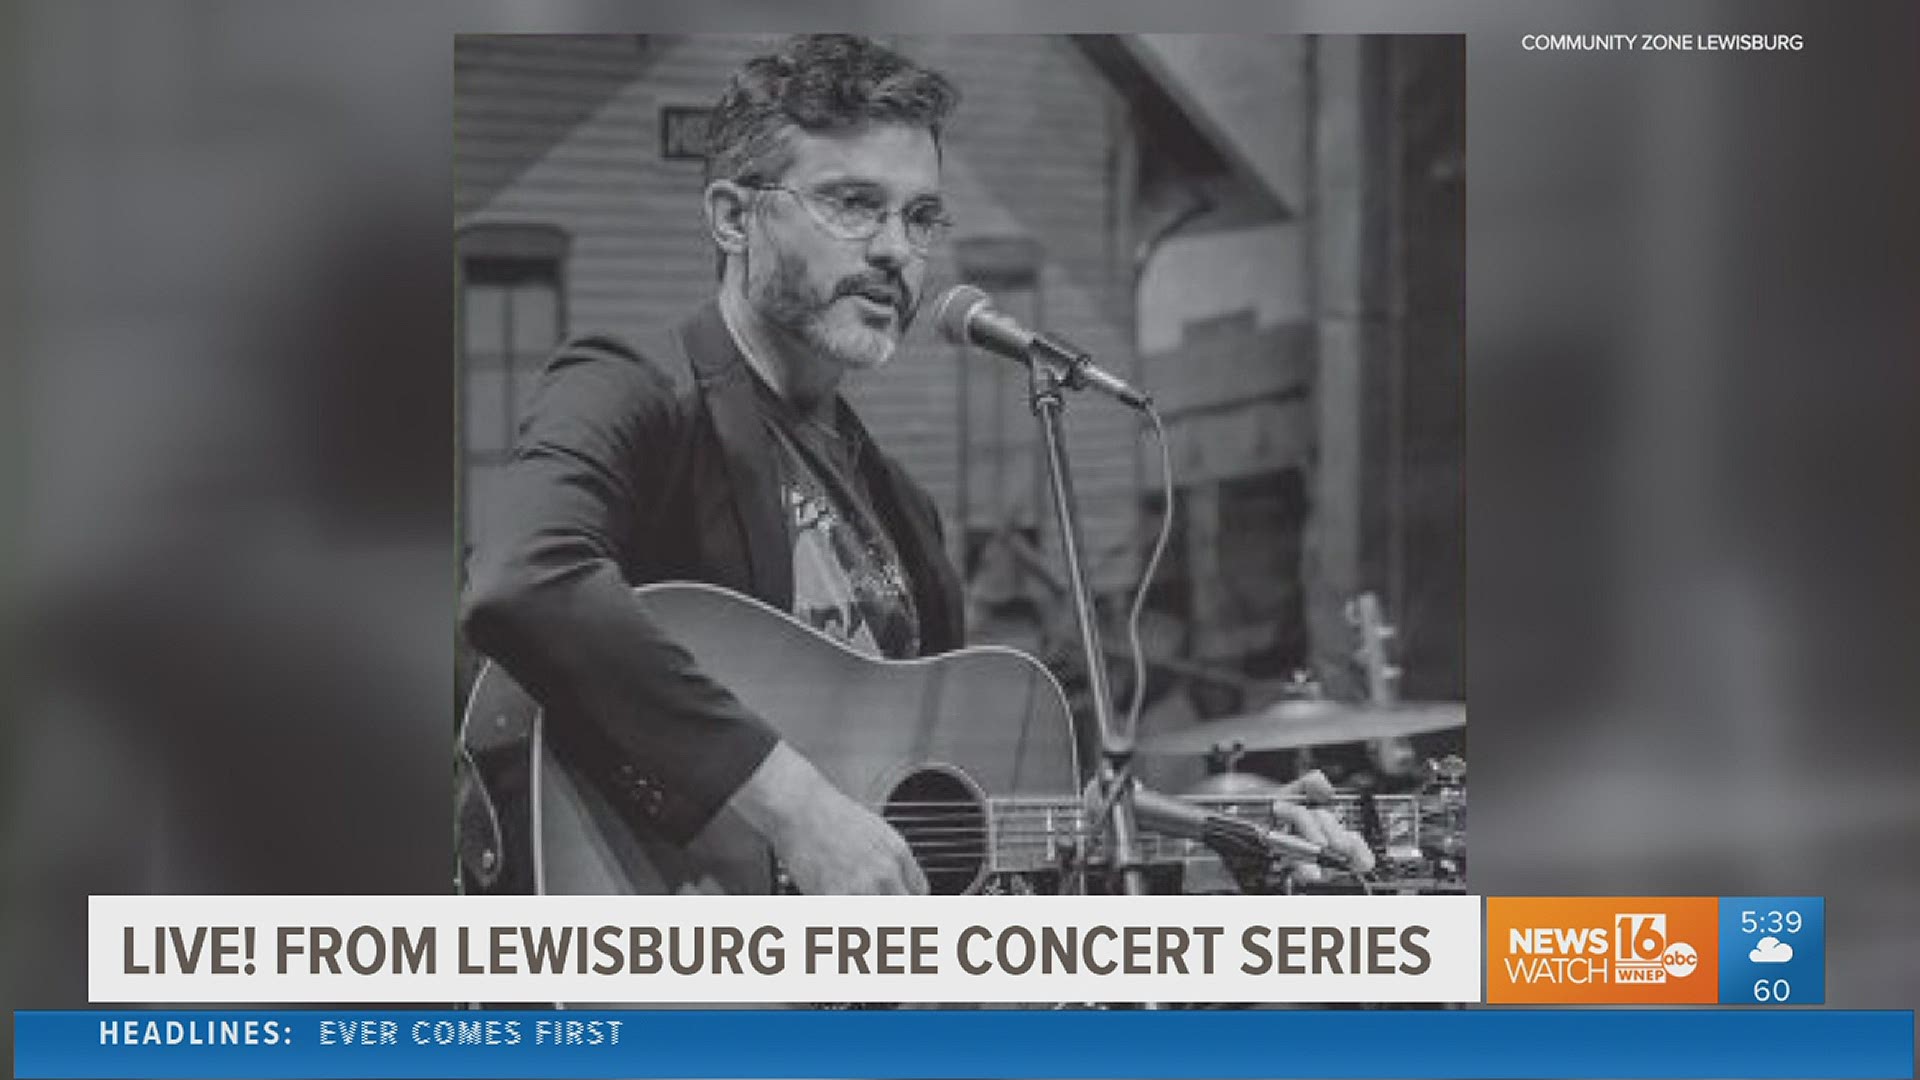 All over our area, many communities are bringing back free live concert series to celebrate towns and more!